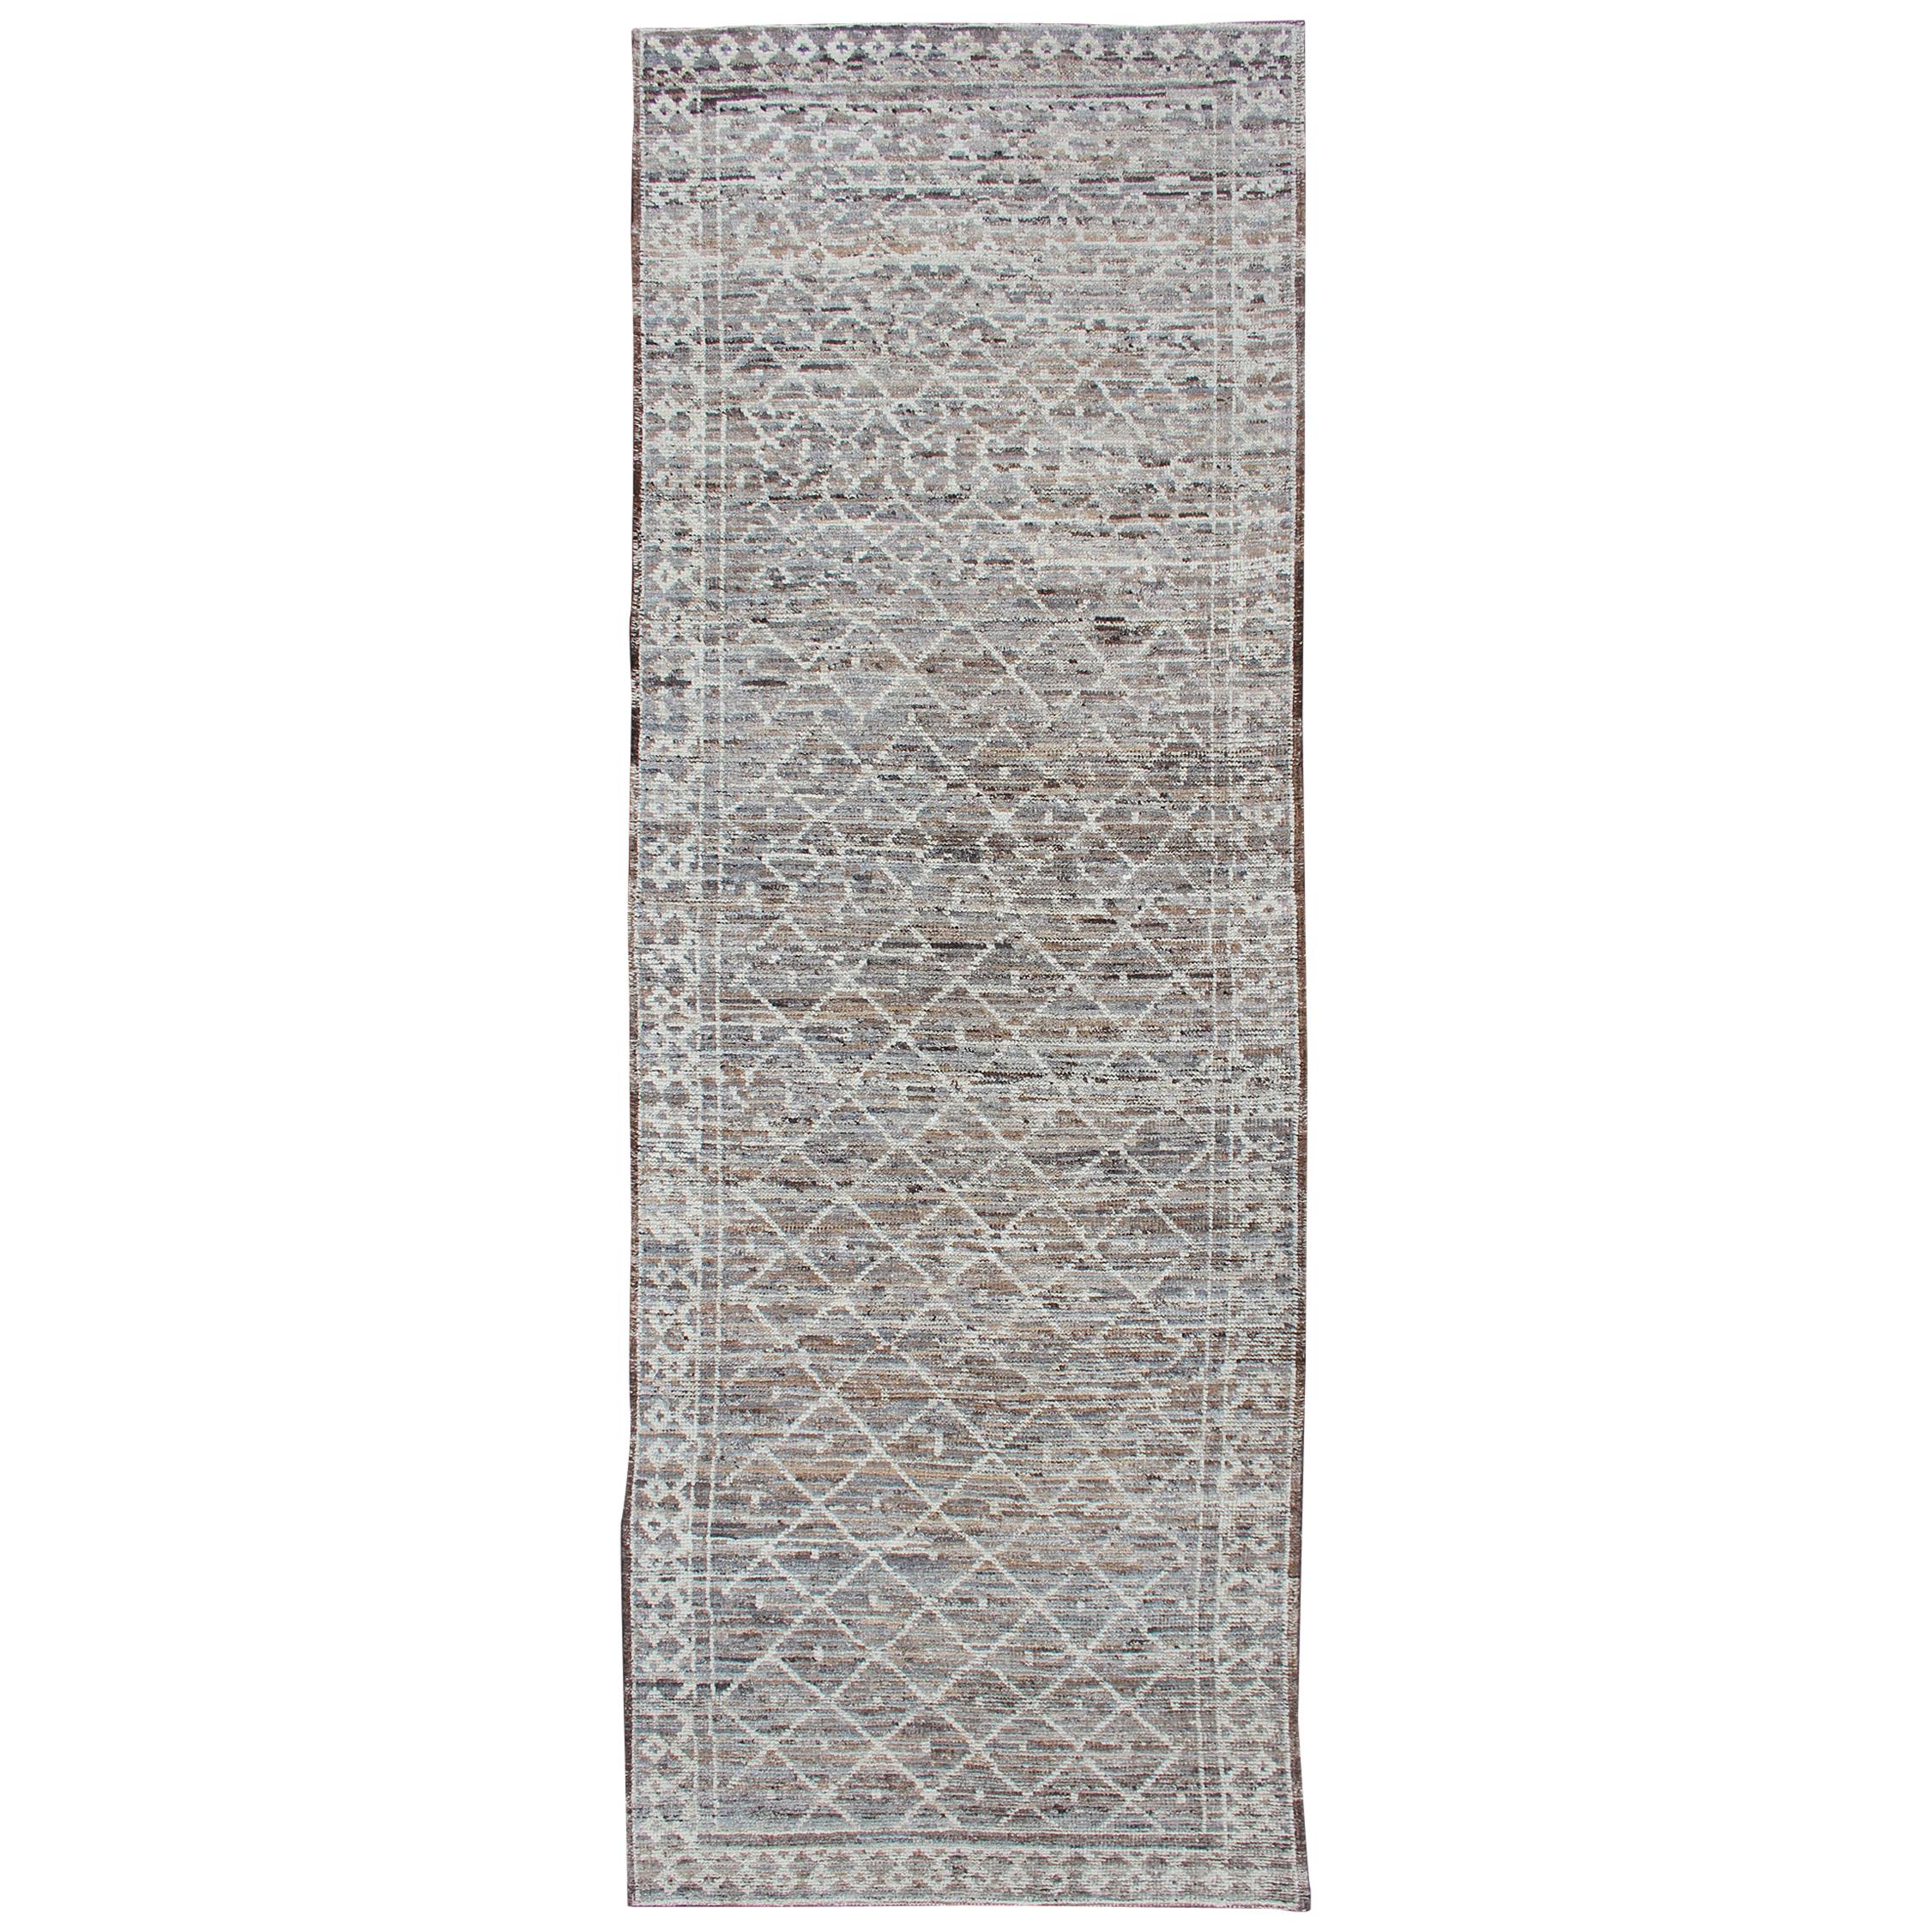 Modern Rug with Tribal Design in Light Gray, Taupe, Brown and Naturals Colors For Sale